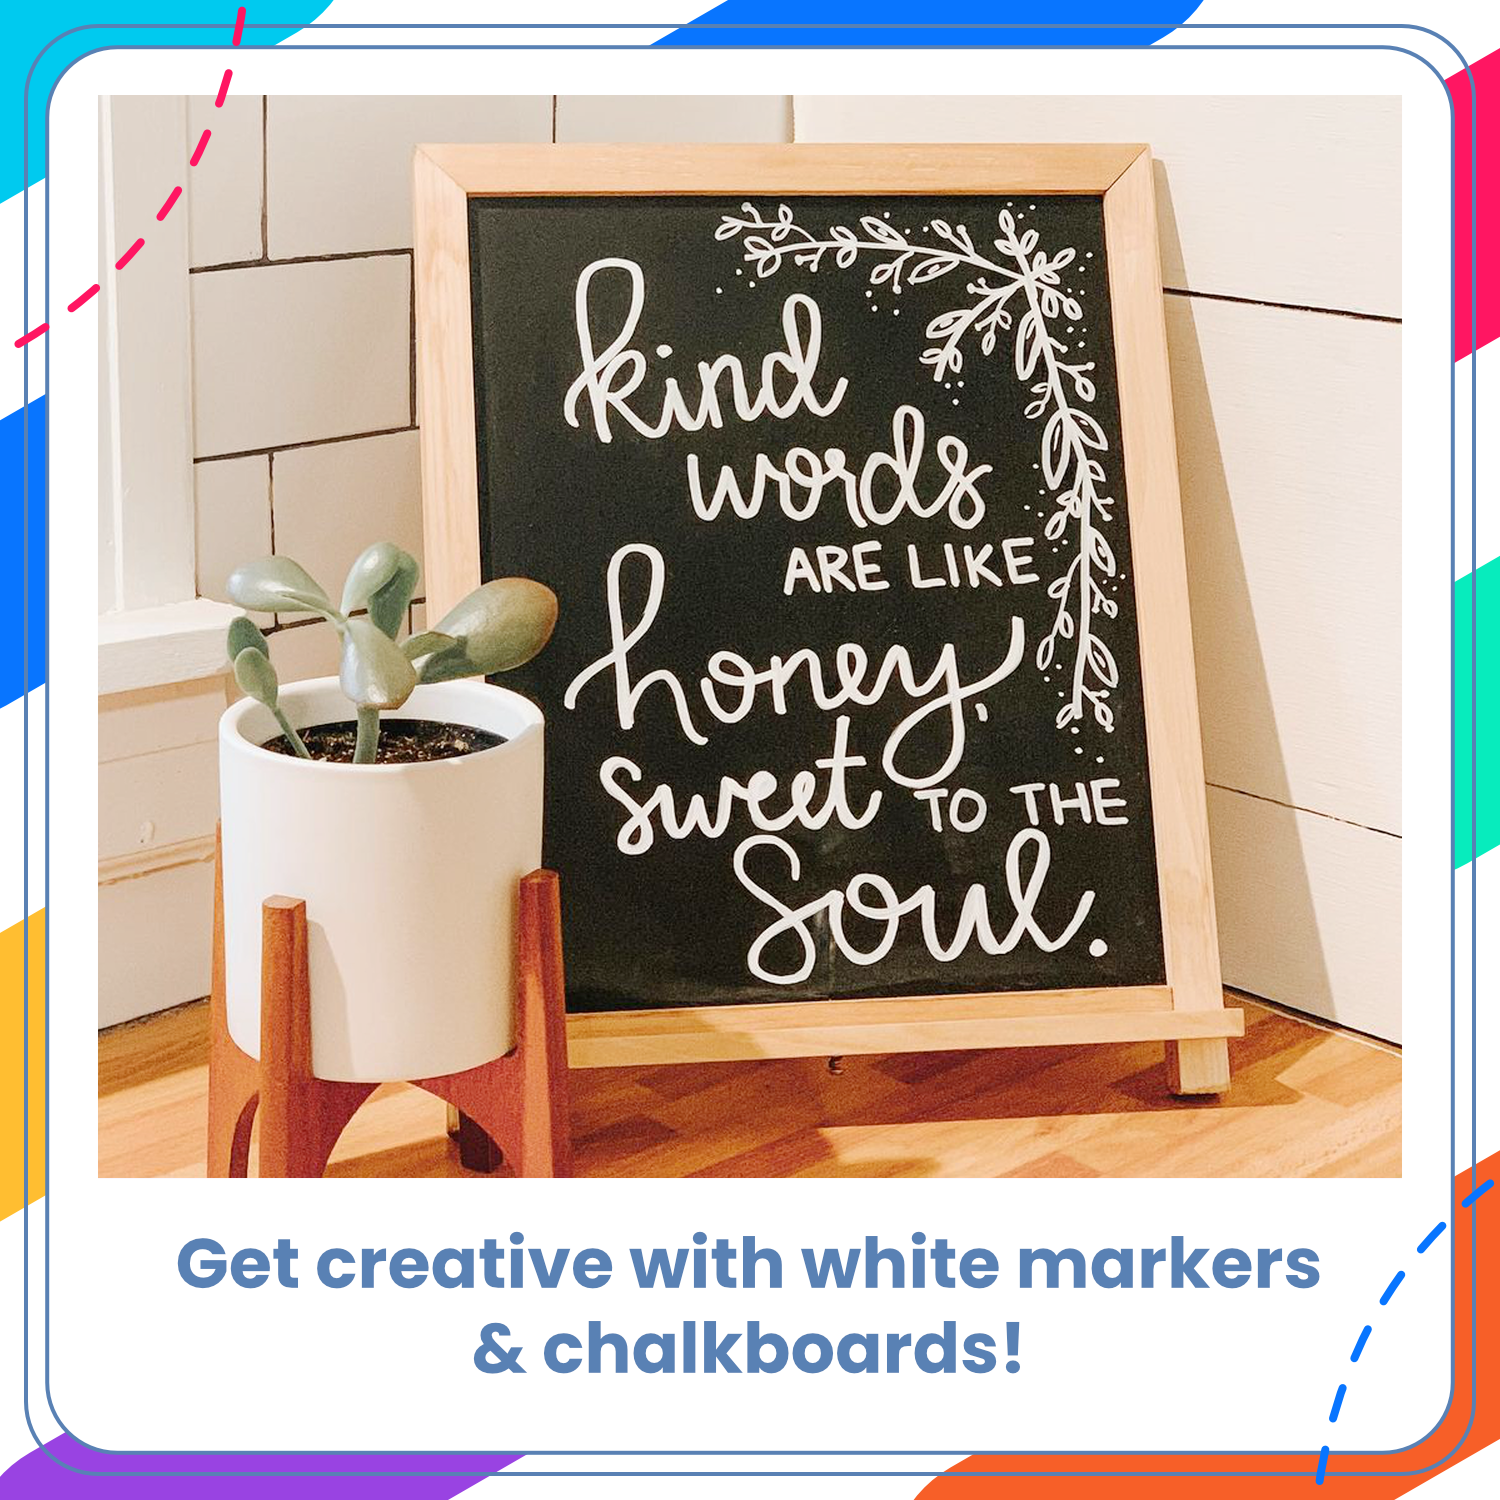 White Chalk Markers - Variety Pack of 6  Fine and Bold Tip (3mm and 6 -  Chalkola Art Supply